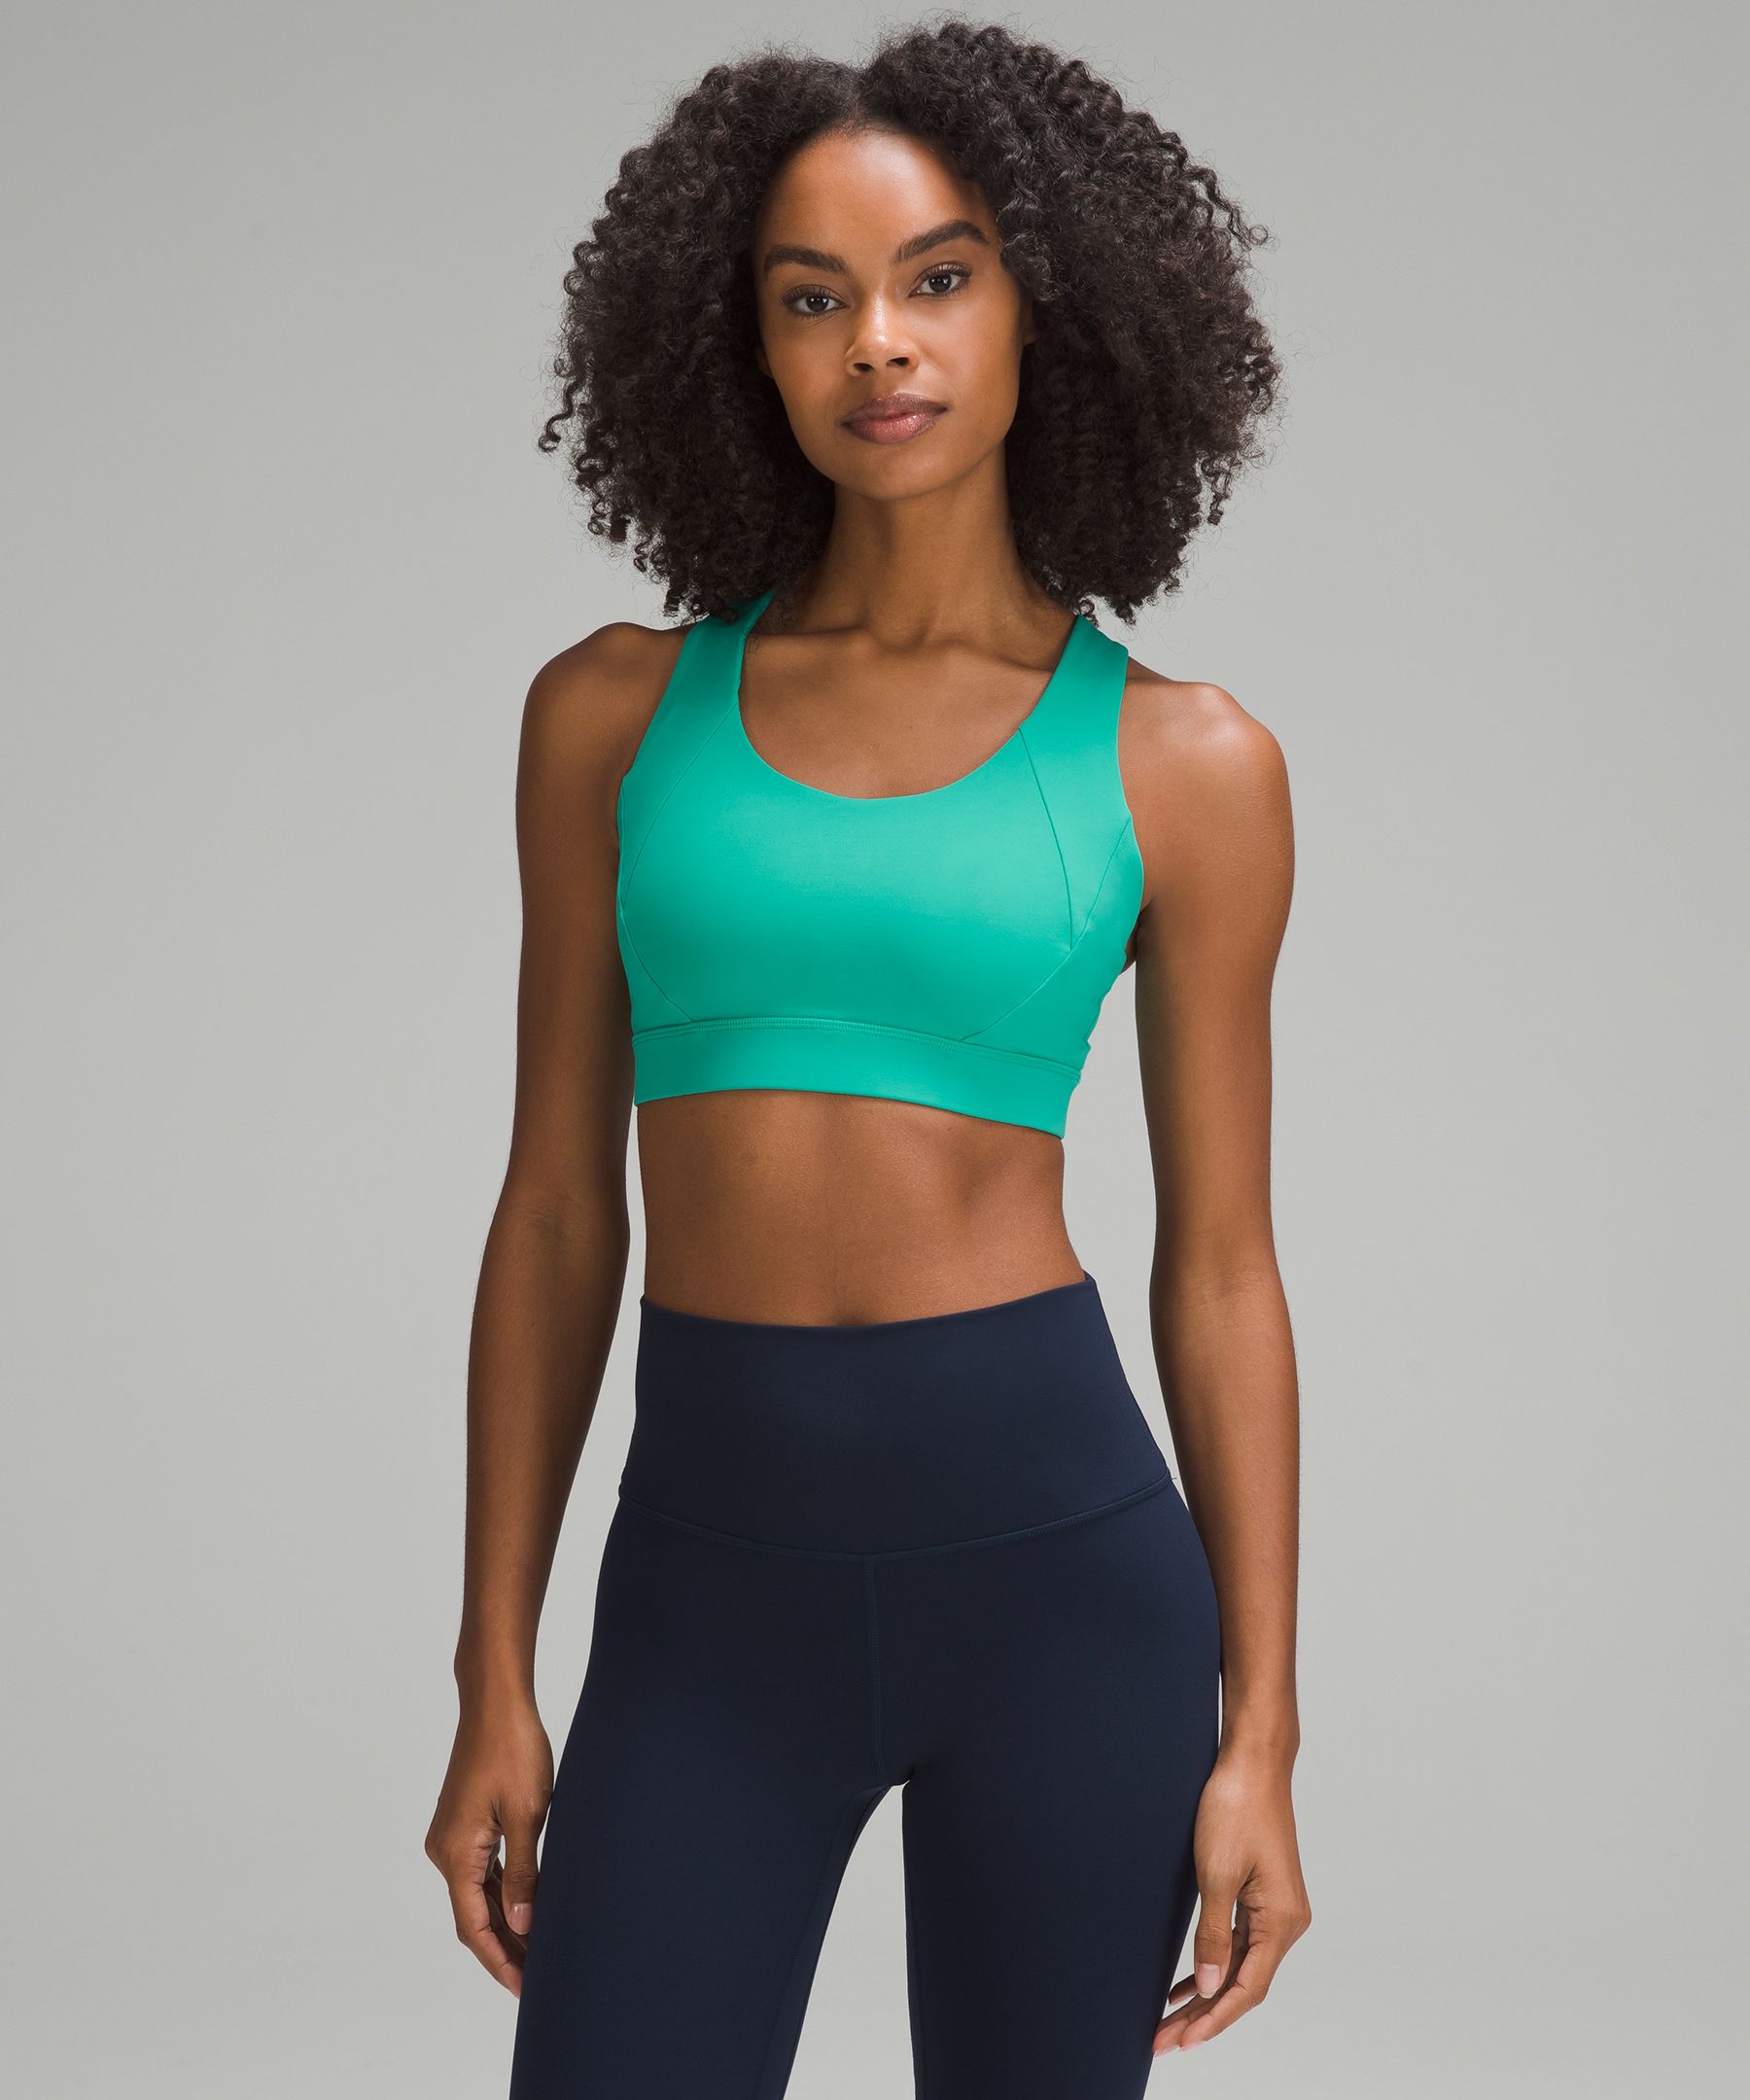 Lululemon Free To Be Elevated Bra Light Support, Dd/ddd(e) Cup In Maldives Green